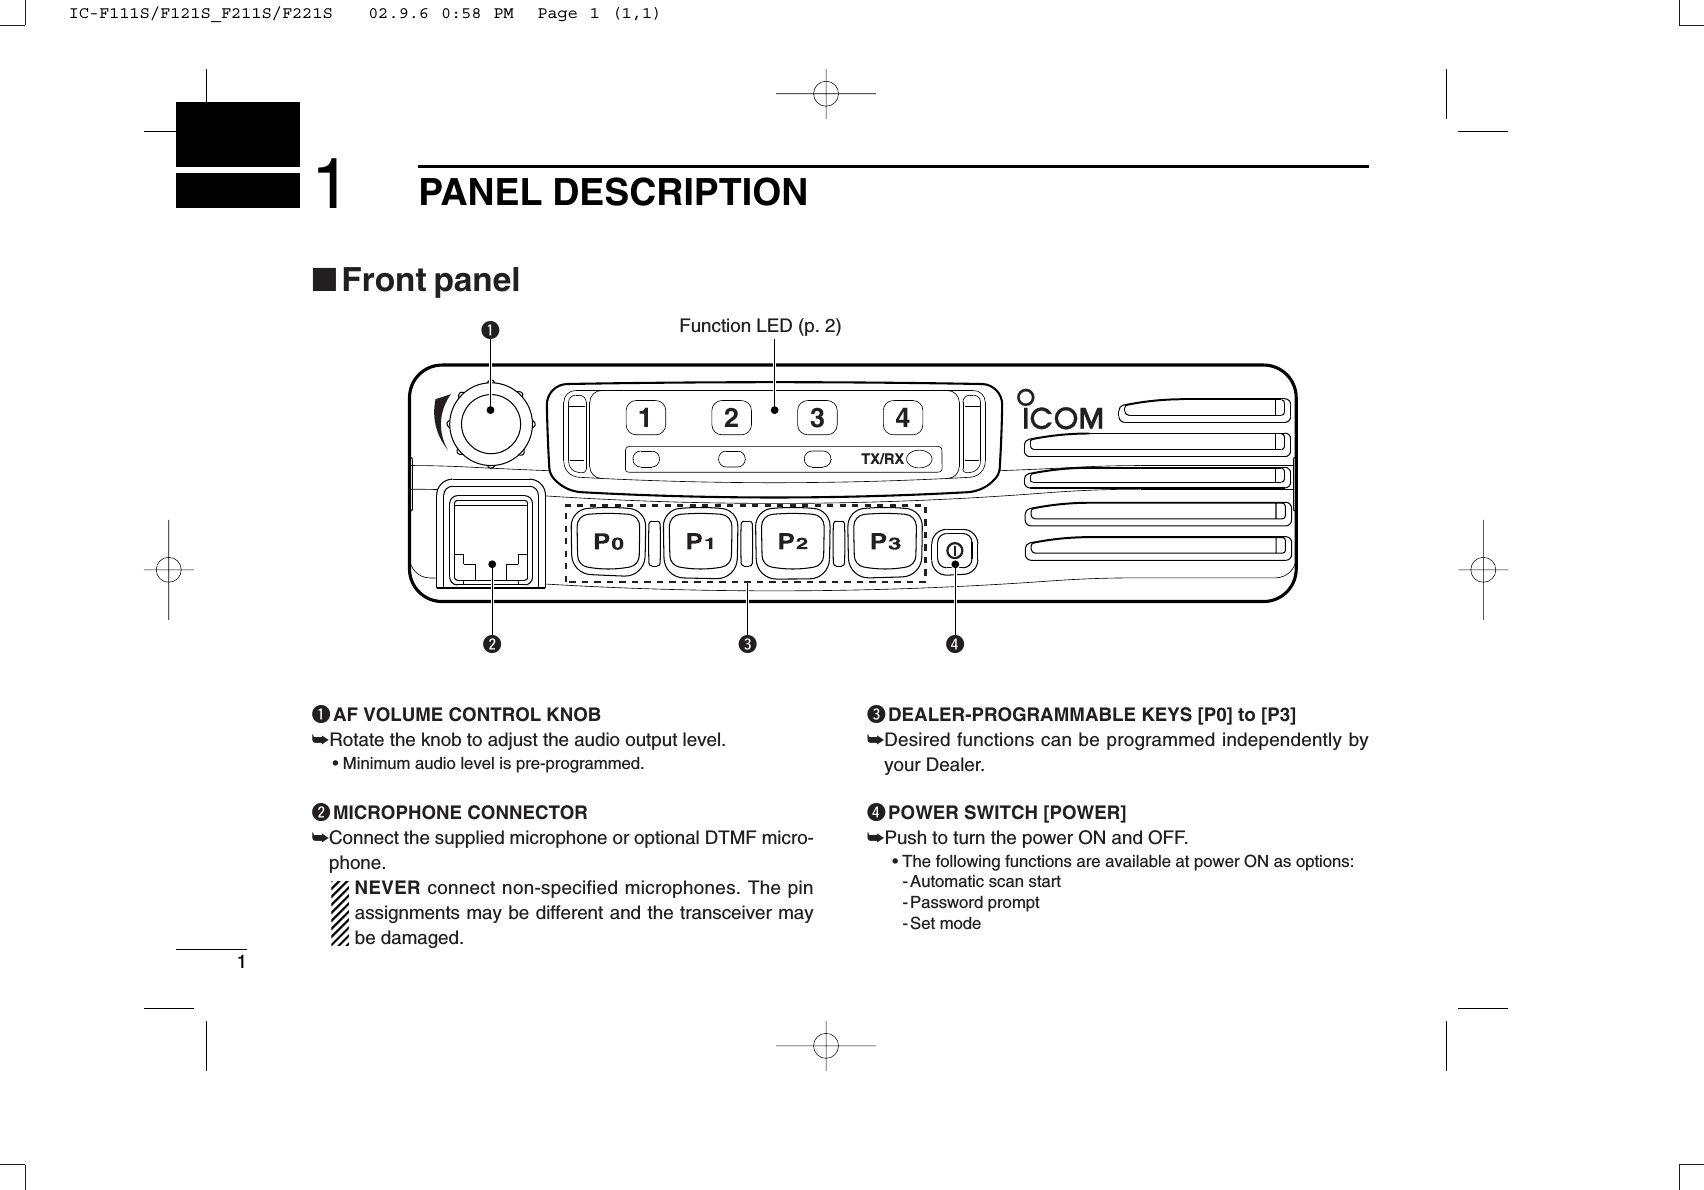 11PANEL DESCRIPTIONTX/RX1234qwerFunction LED (p. 2)■Front panelqAF VOLUME CONTROL KNOB➥Rotate the knob to adjust the audio output level.• Minimum audio level is pre-programmed.wMICROPHONE CONNECTOR➥Connect the supplied microphone or optional DTMF micro-phone.NEVER connect non-specified microphones. The pinassignments may be different and the transceiver maybe damaged.eDEALER-PROGRAMMABLE KEYS [P0] to [P3]➥Desired functions can be programmed independently byyour Dealer.rPOWER SWITCH [POWER]➥Push to turn the power ON and OFF.• The following functions are available at power ON as options:- Automatic scan start- Password prompt- Set modeIC-F111S/F121S_F211S/F221S   02.9.6 0:58 PM  Page 1 (1,1)